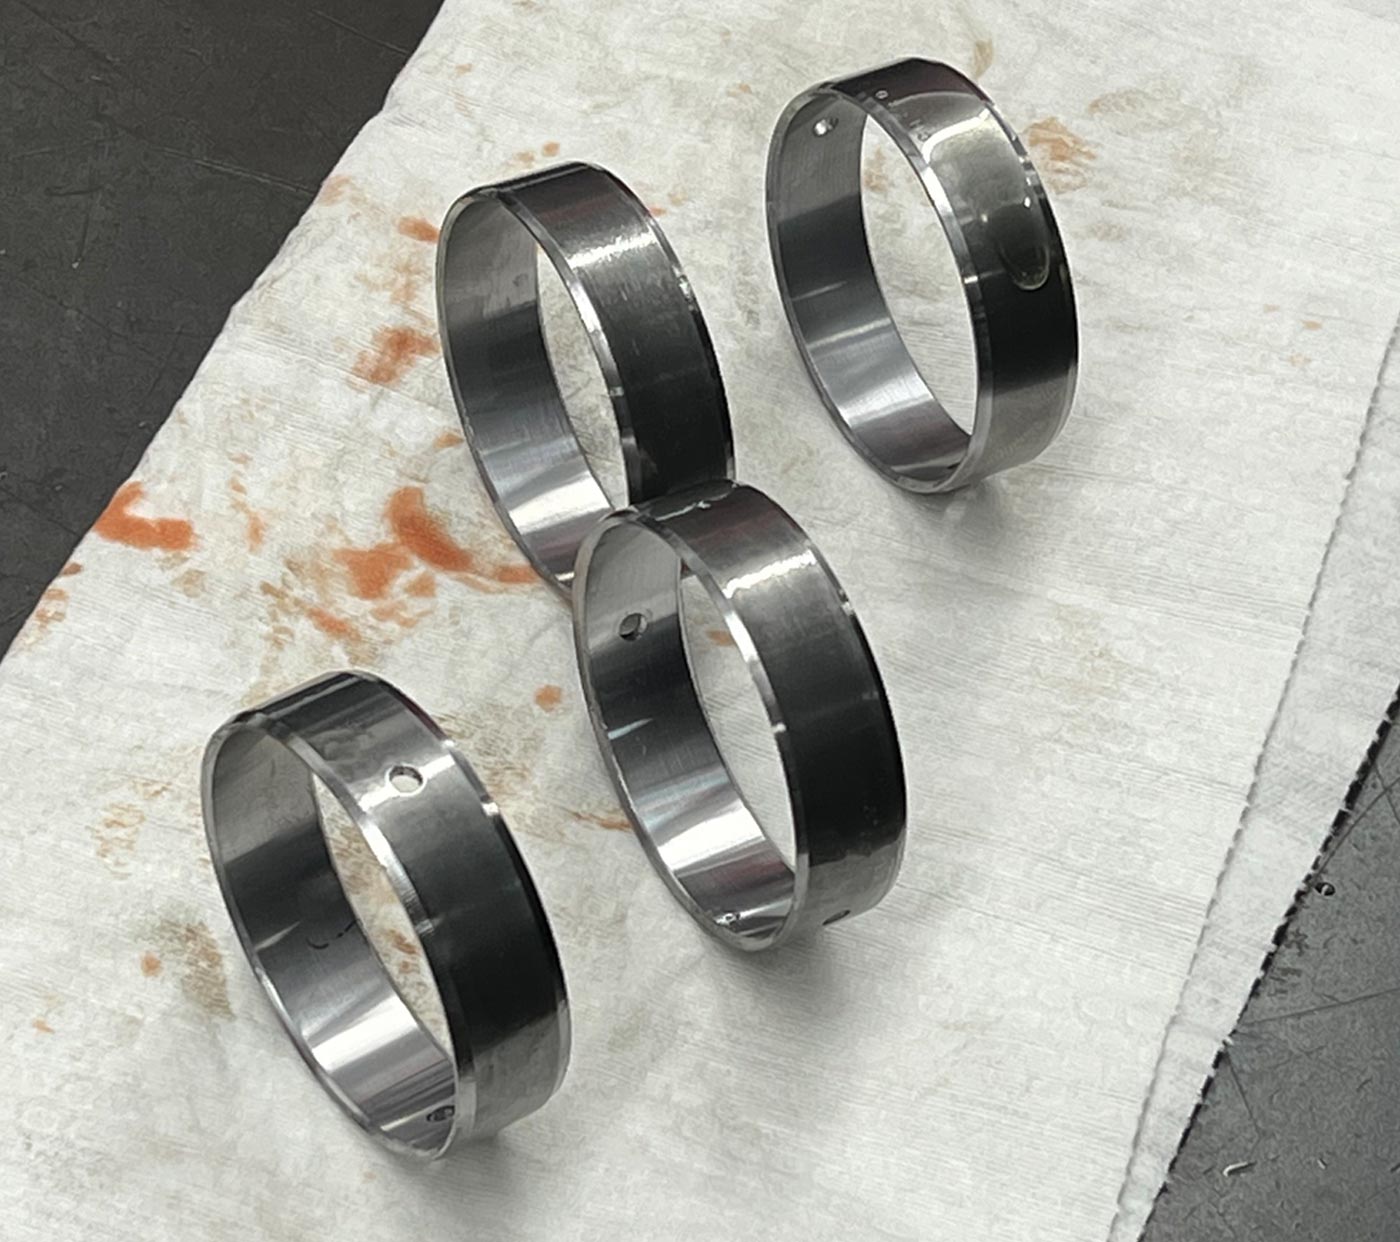 two Dura-Bond cam bearing sets (PN DUR-CH-10) sit on a work surface